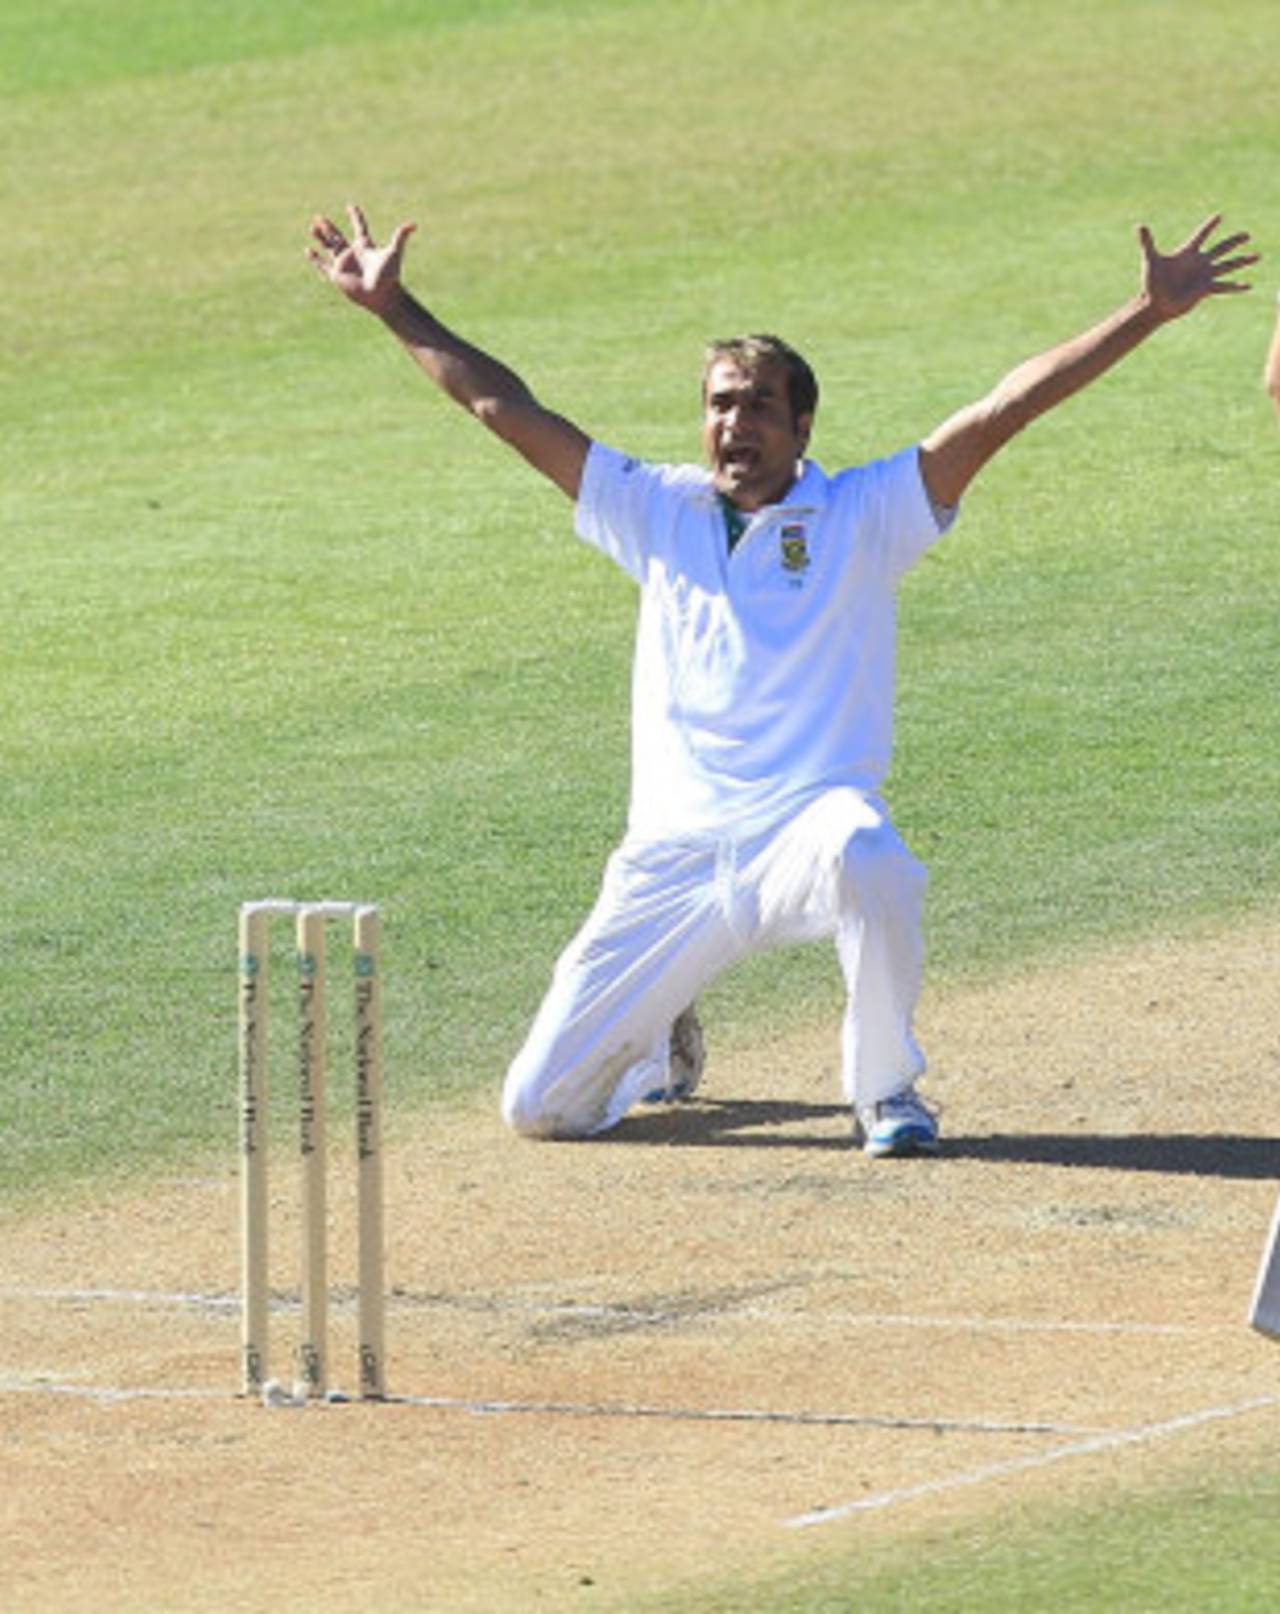 Imran Tahir makes a vociferous appeal, New Zealand v South Africa, 1st Test, Dunedin, 2nd day, March 8, 2012